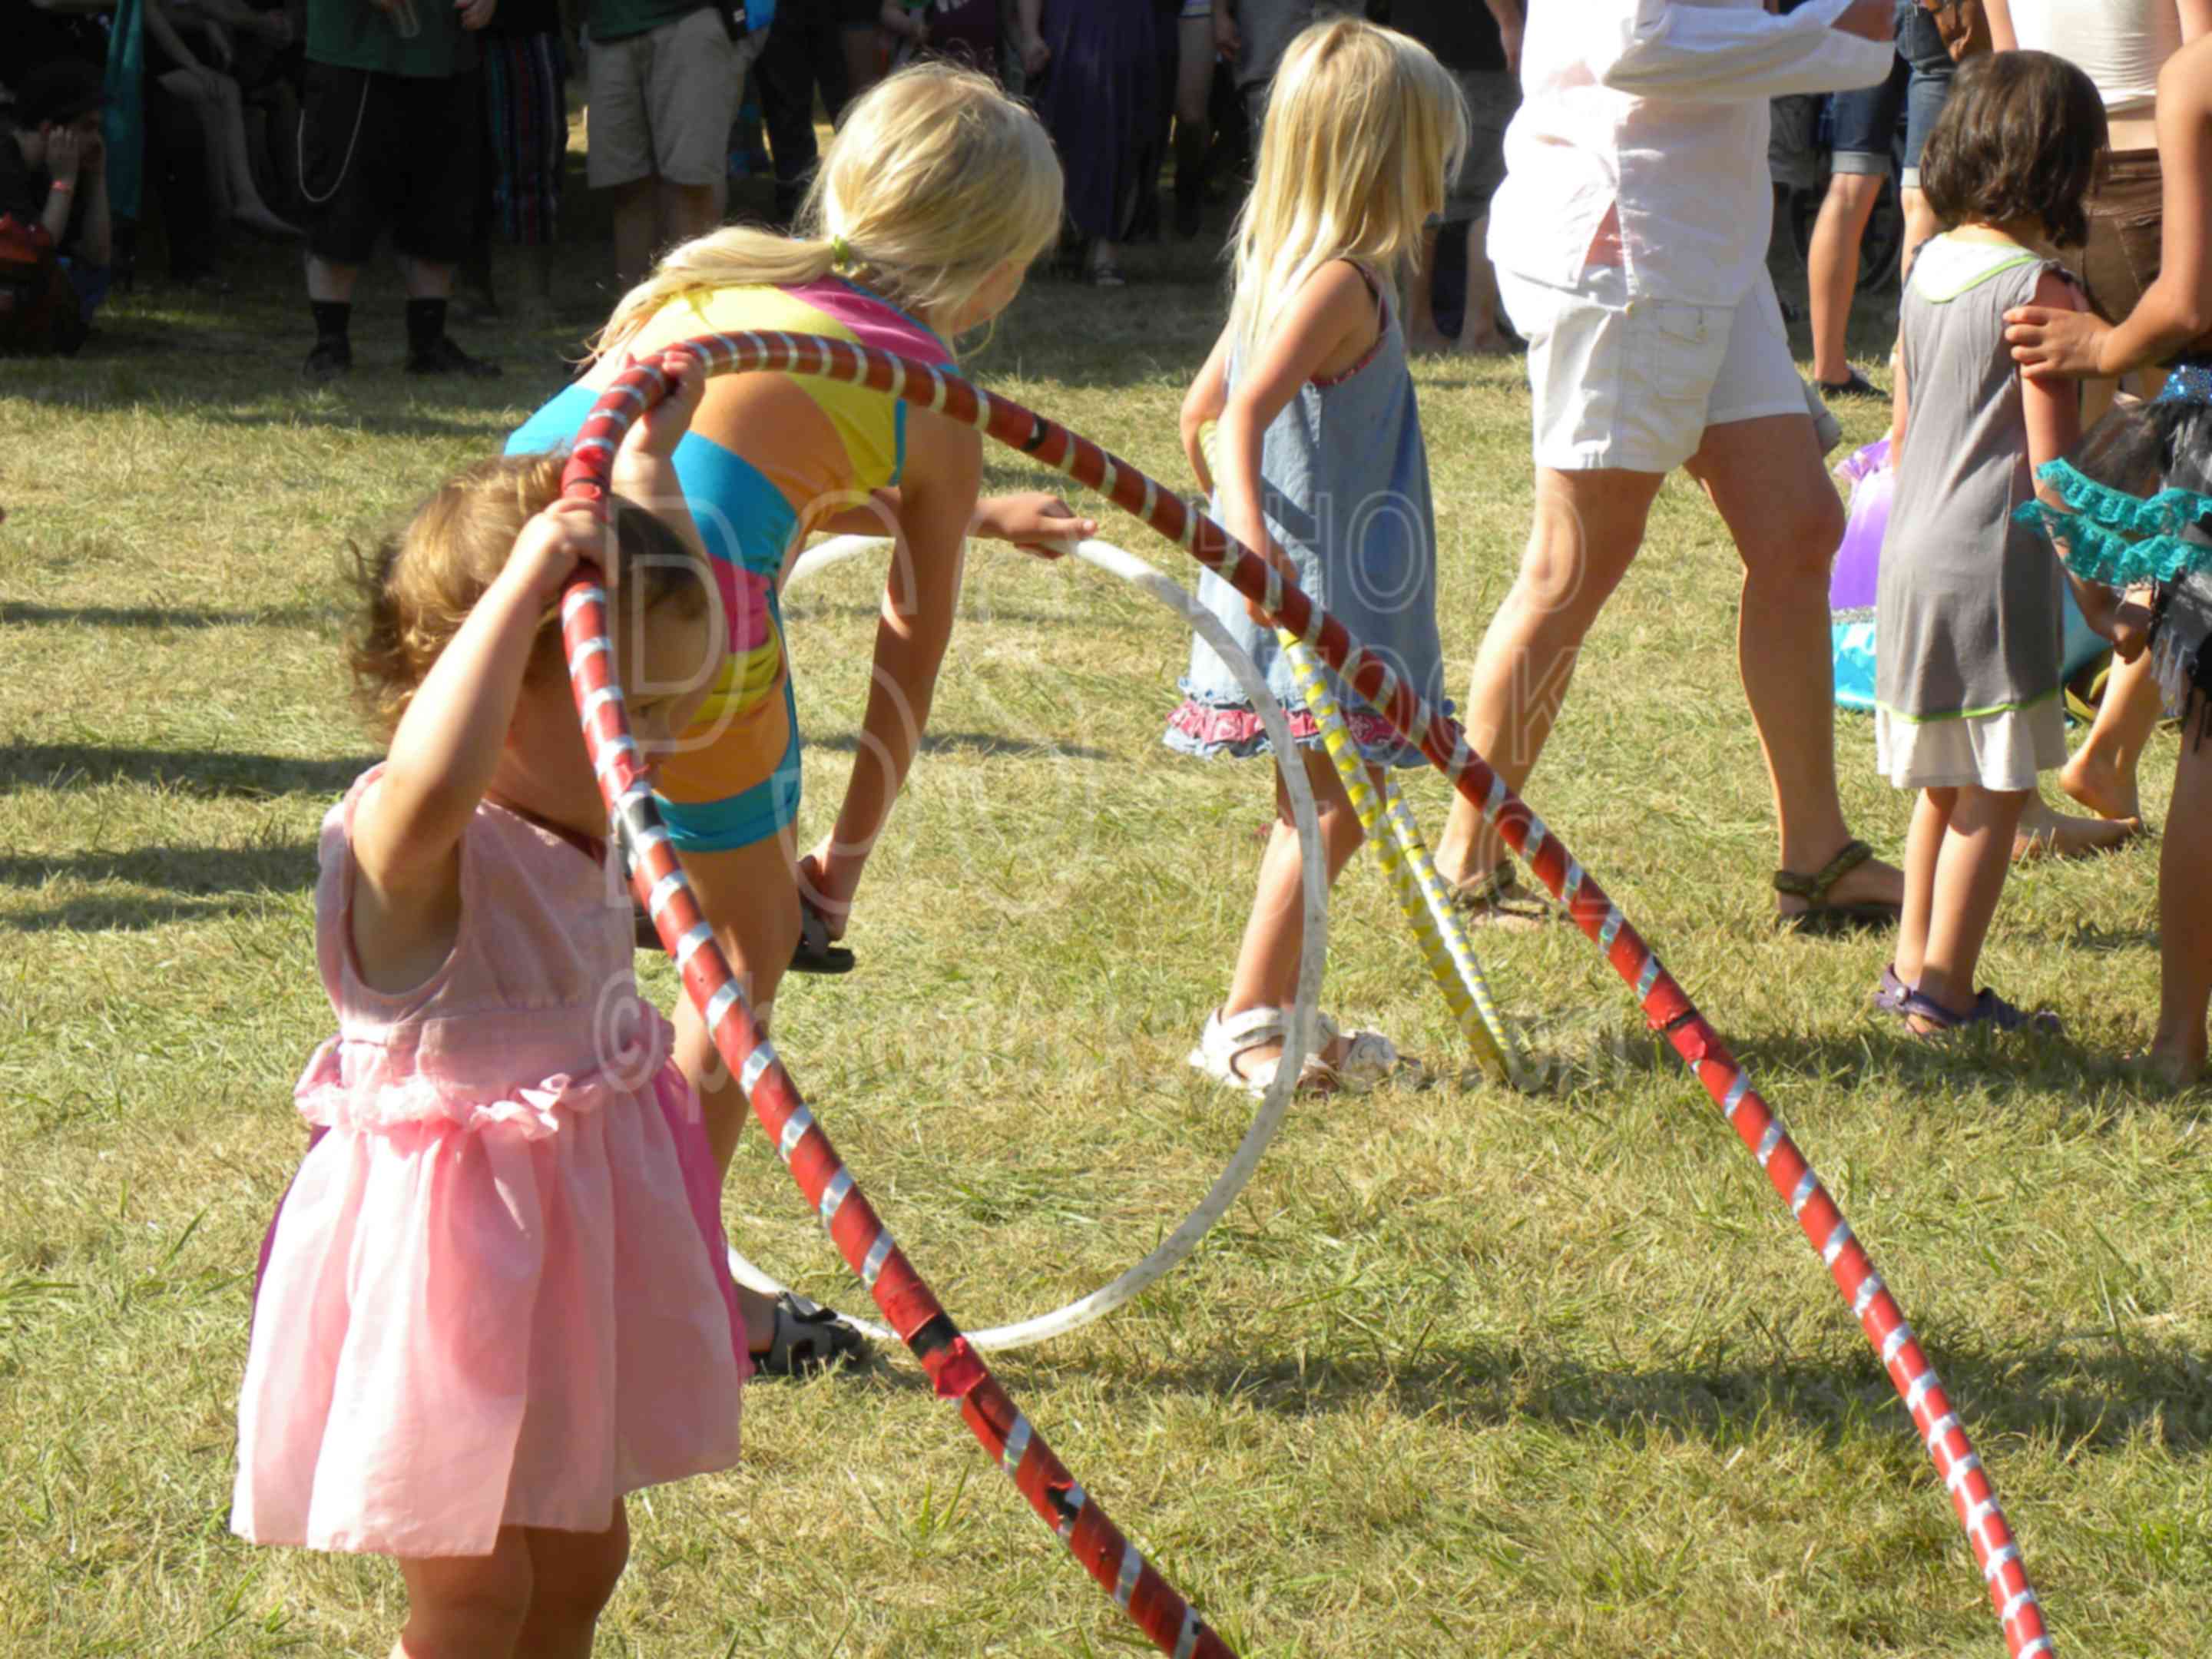 Girl with Hula Hoop,color,fair,faire,festival,gathering,hippy,hippies,celebration,hula hoop,girl,children